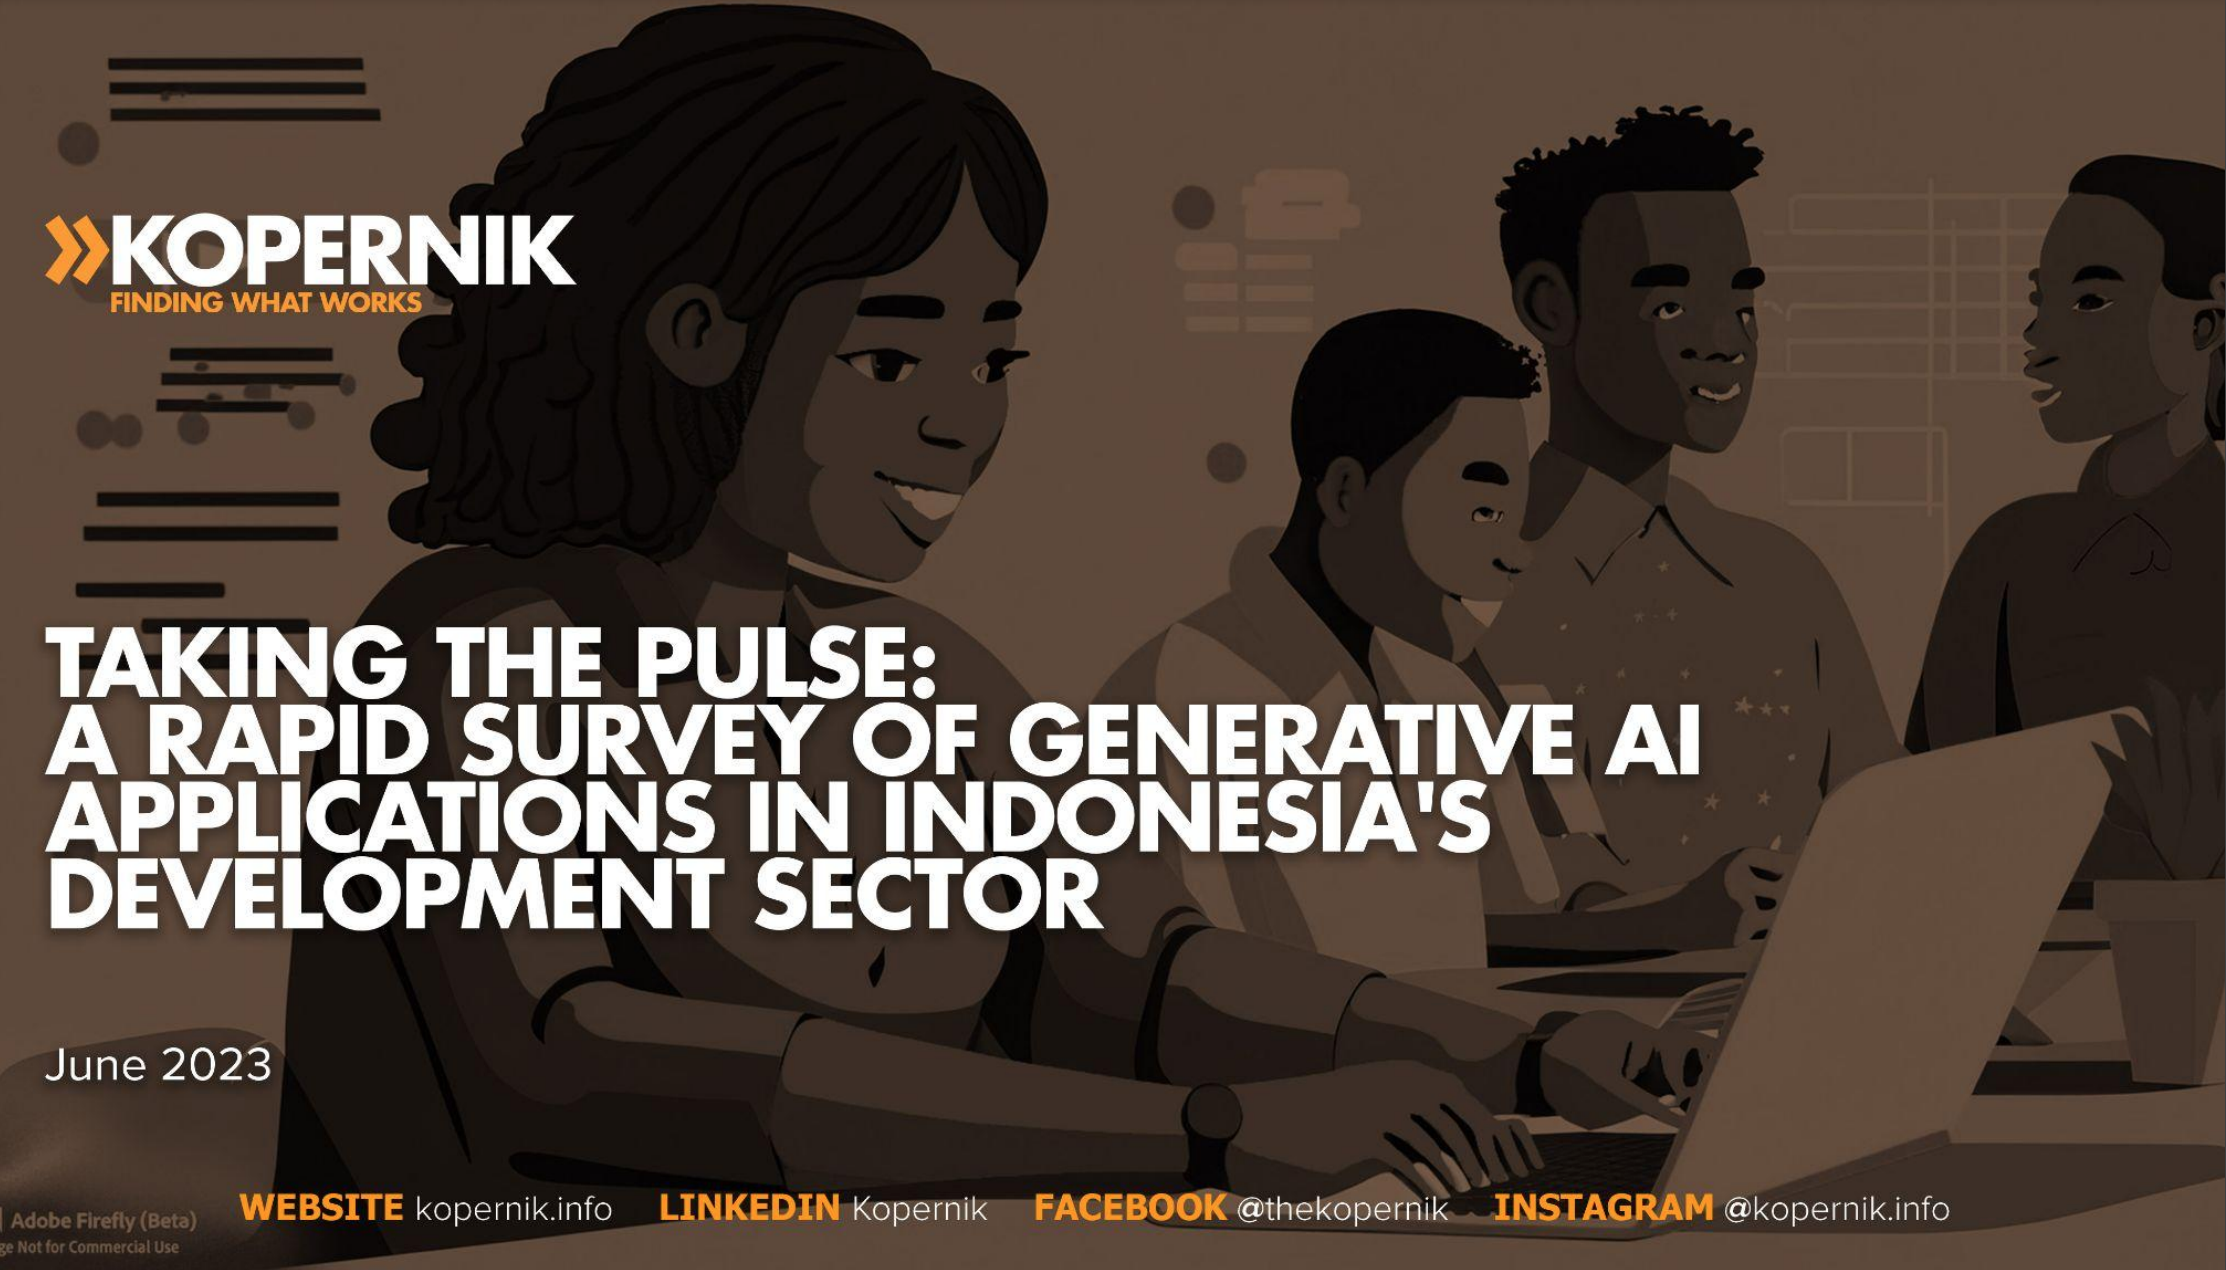 A Rapid Survey of Generative AI Applications in Indonesia's Development Sector